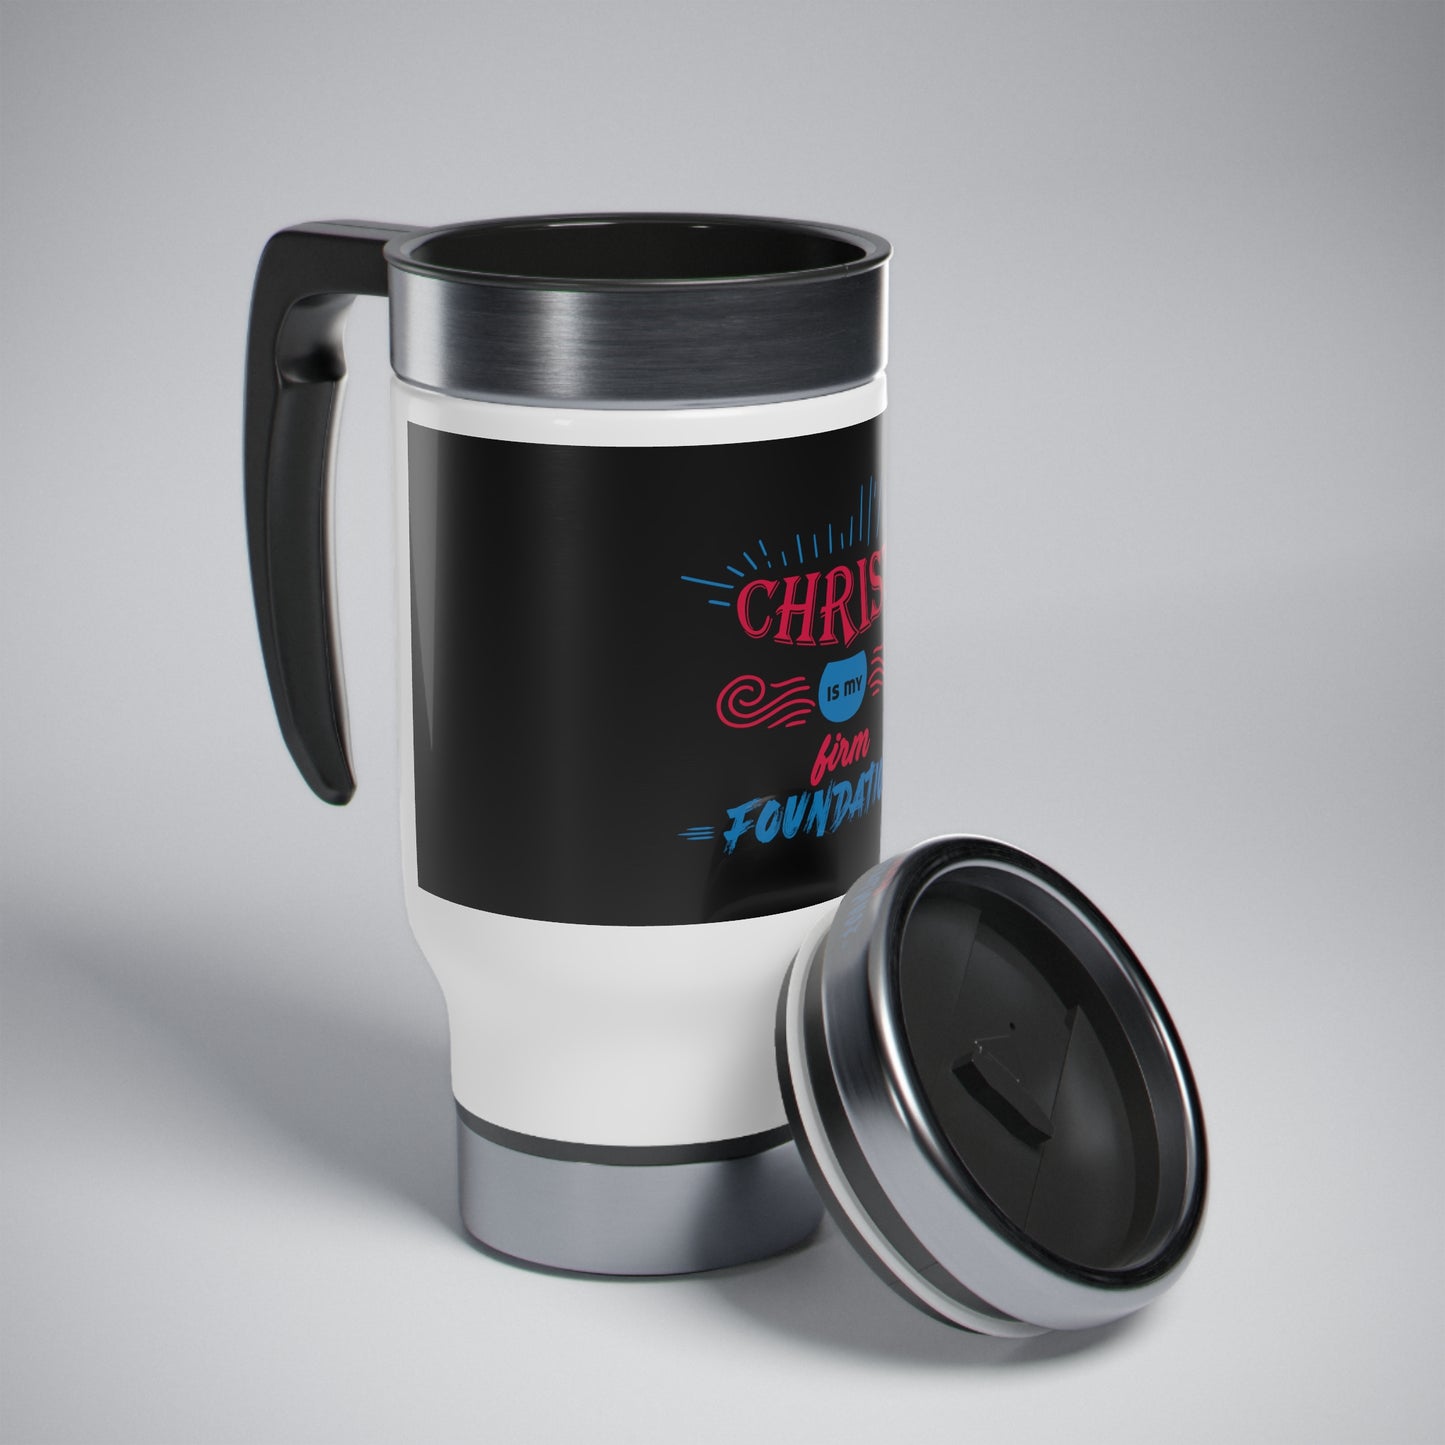 Christ Is My Firm Foundation (2) Travel Mug with Handle, 14oz